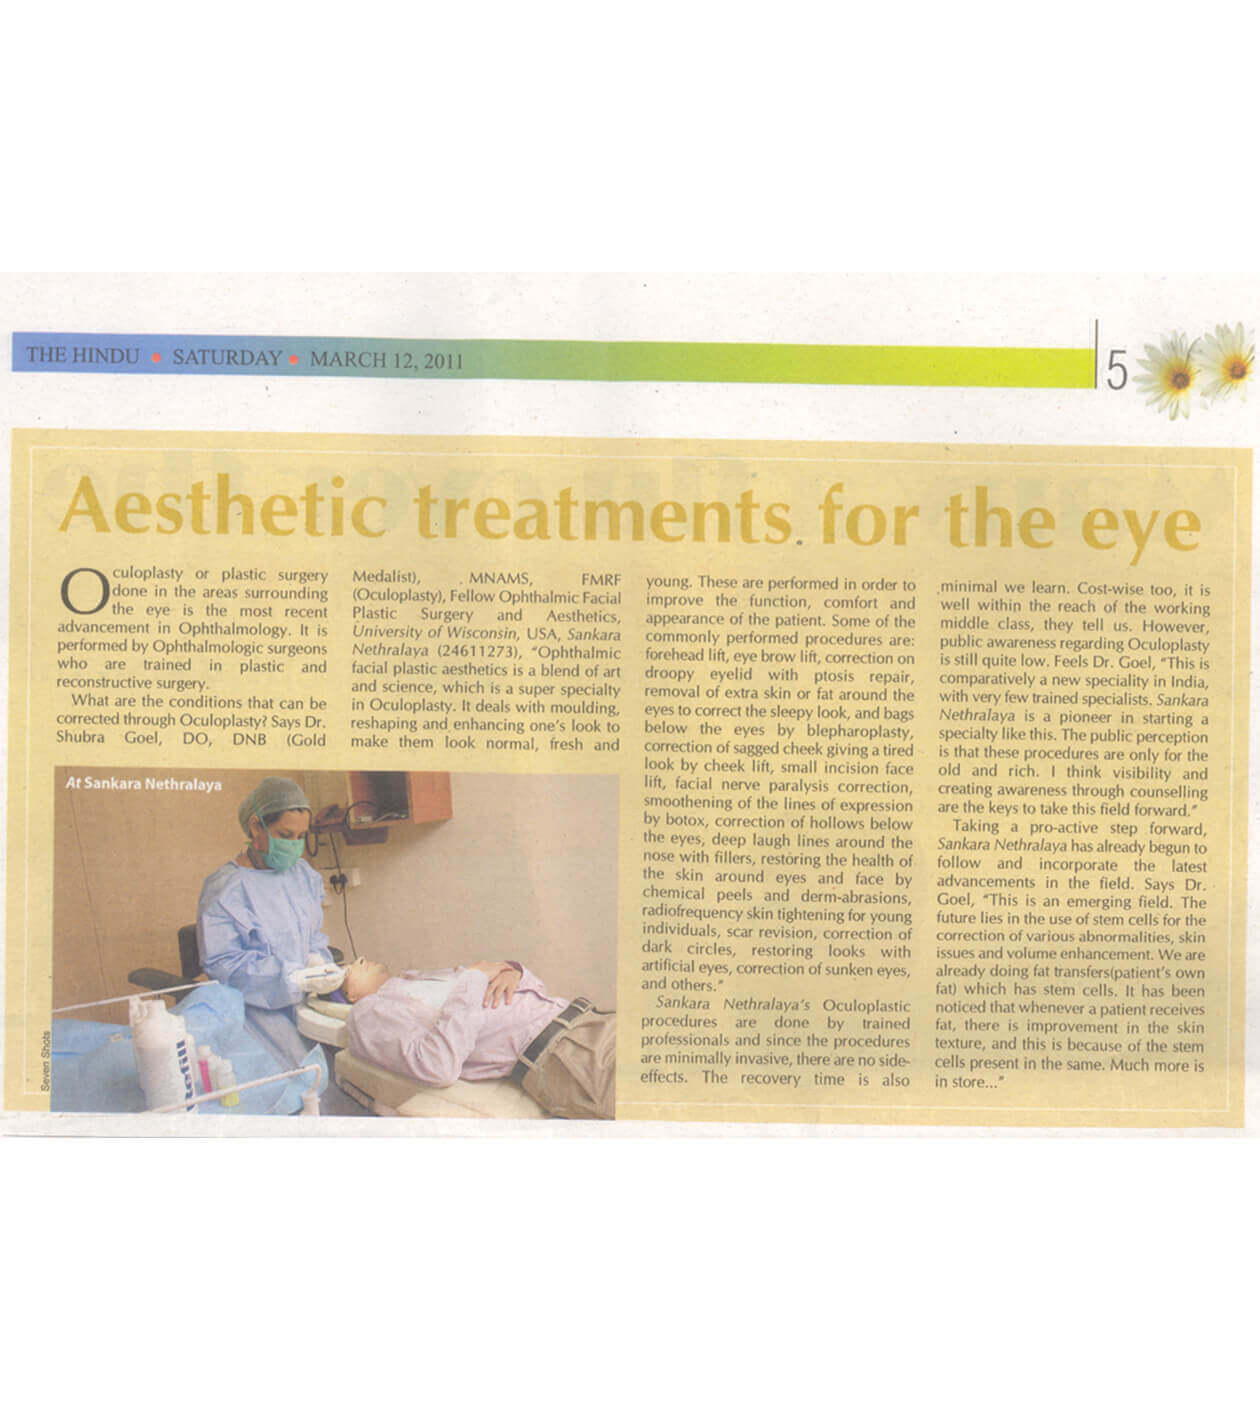 Aesthetic treatments for the eye